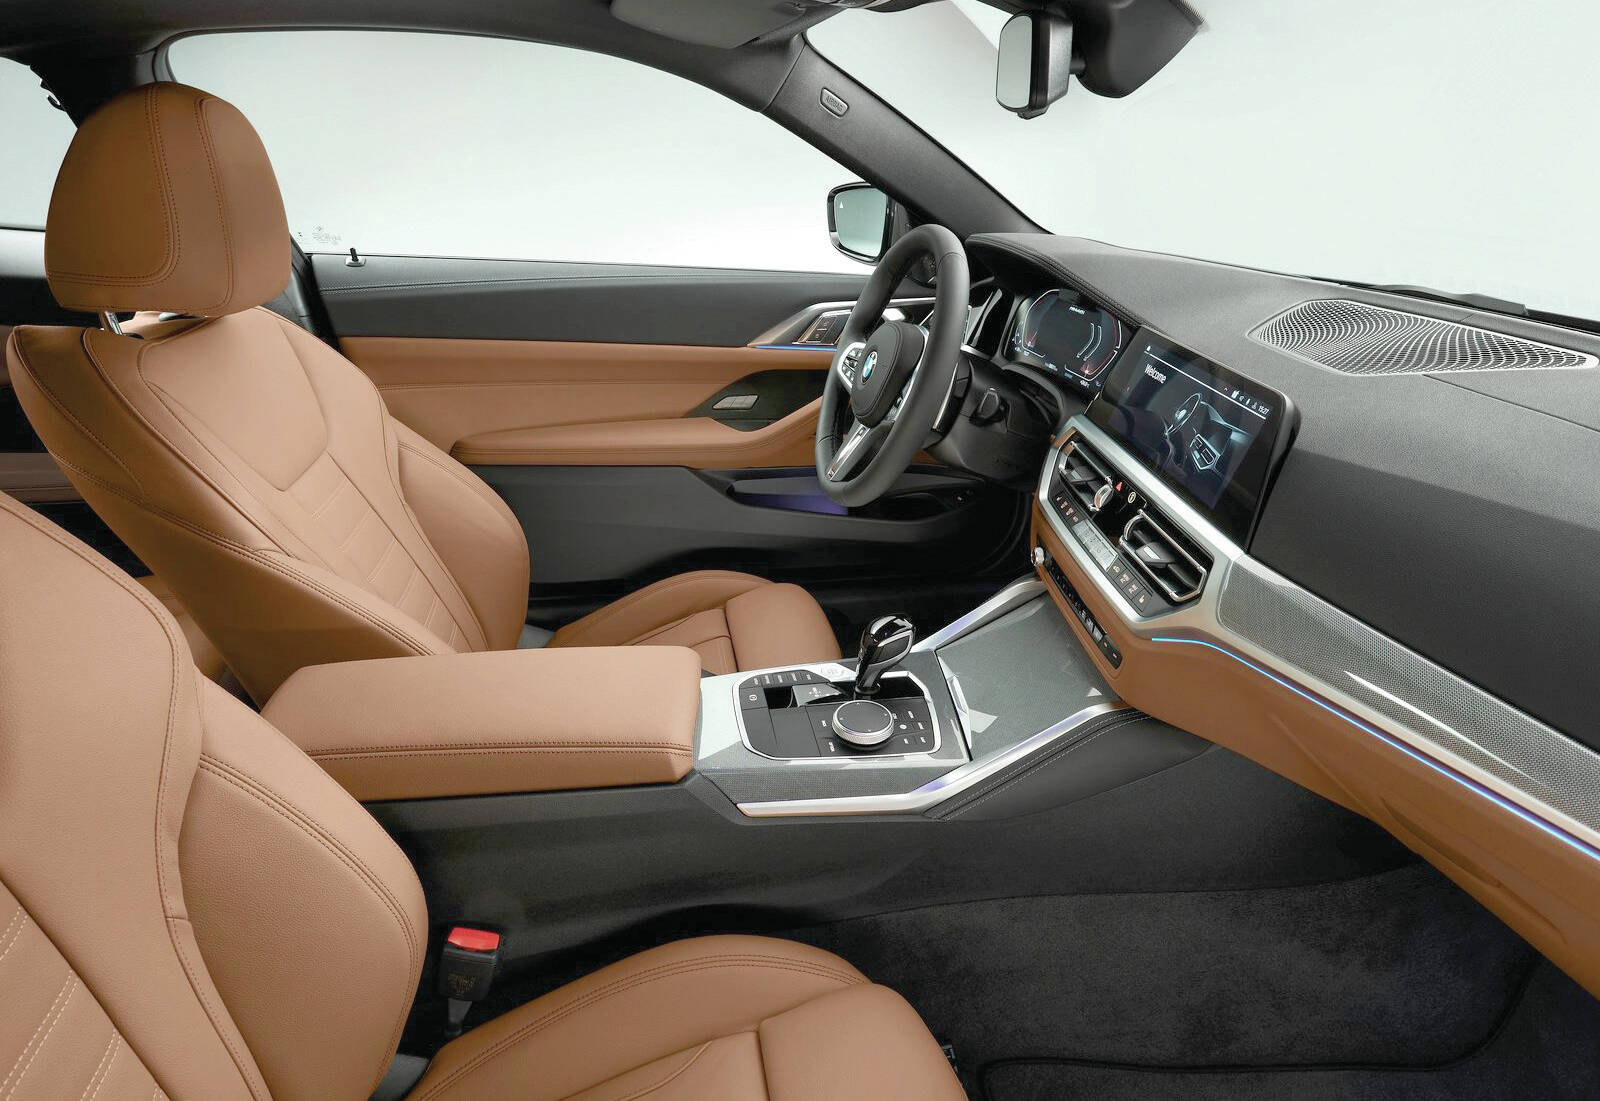 The 4 Series is first and foremost a two-door luxury cruiser. And with a base 255-horsepower four-cylinder engine, it is definitely a cruiser. The interior varies only slightly from that of the 3-Series sedan. PHOTO: BMW